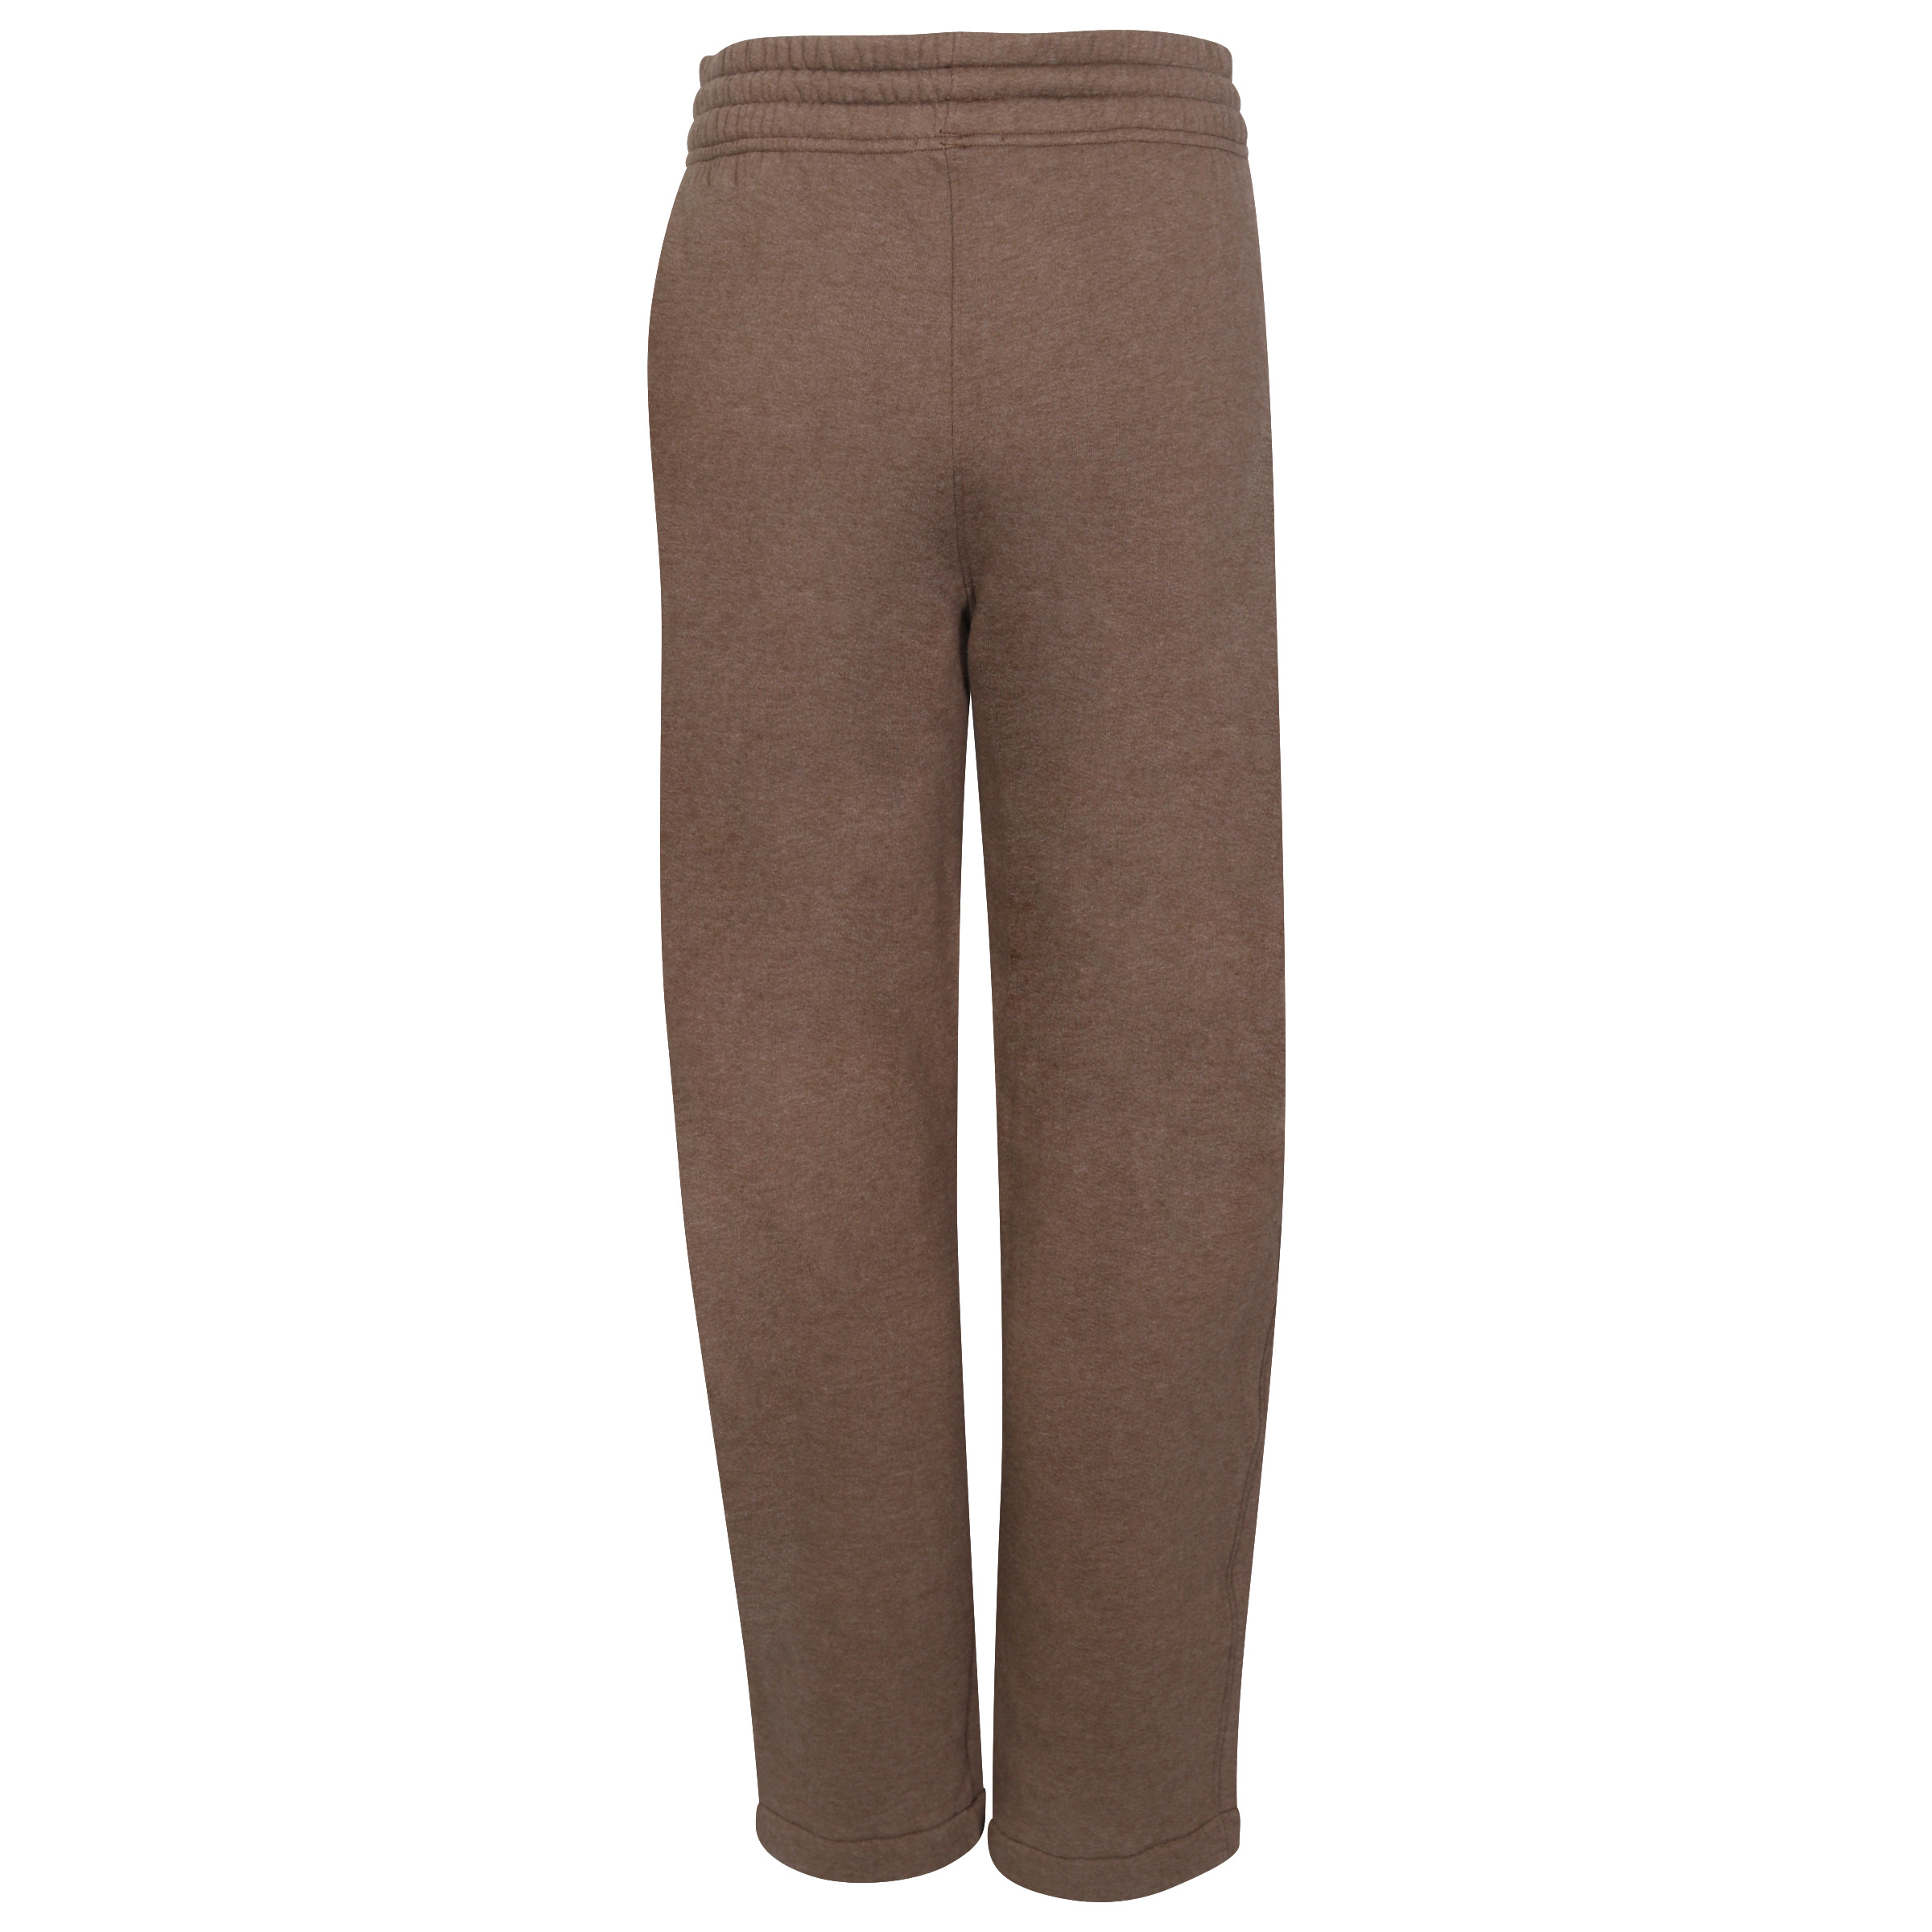 Agolde 90s Sweatpant in Heather Toffee